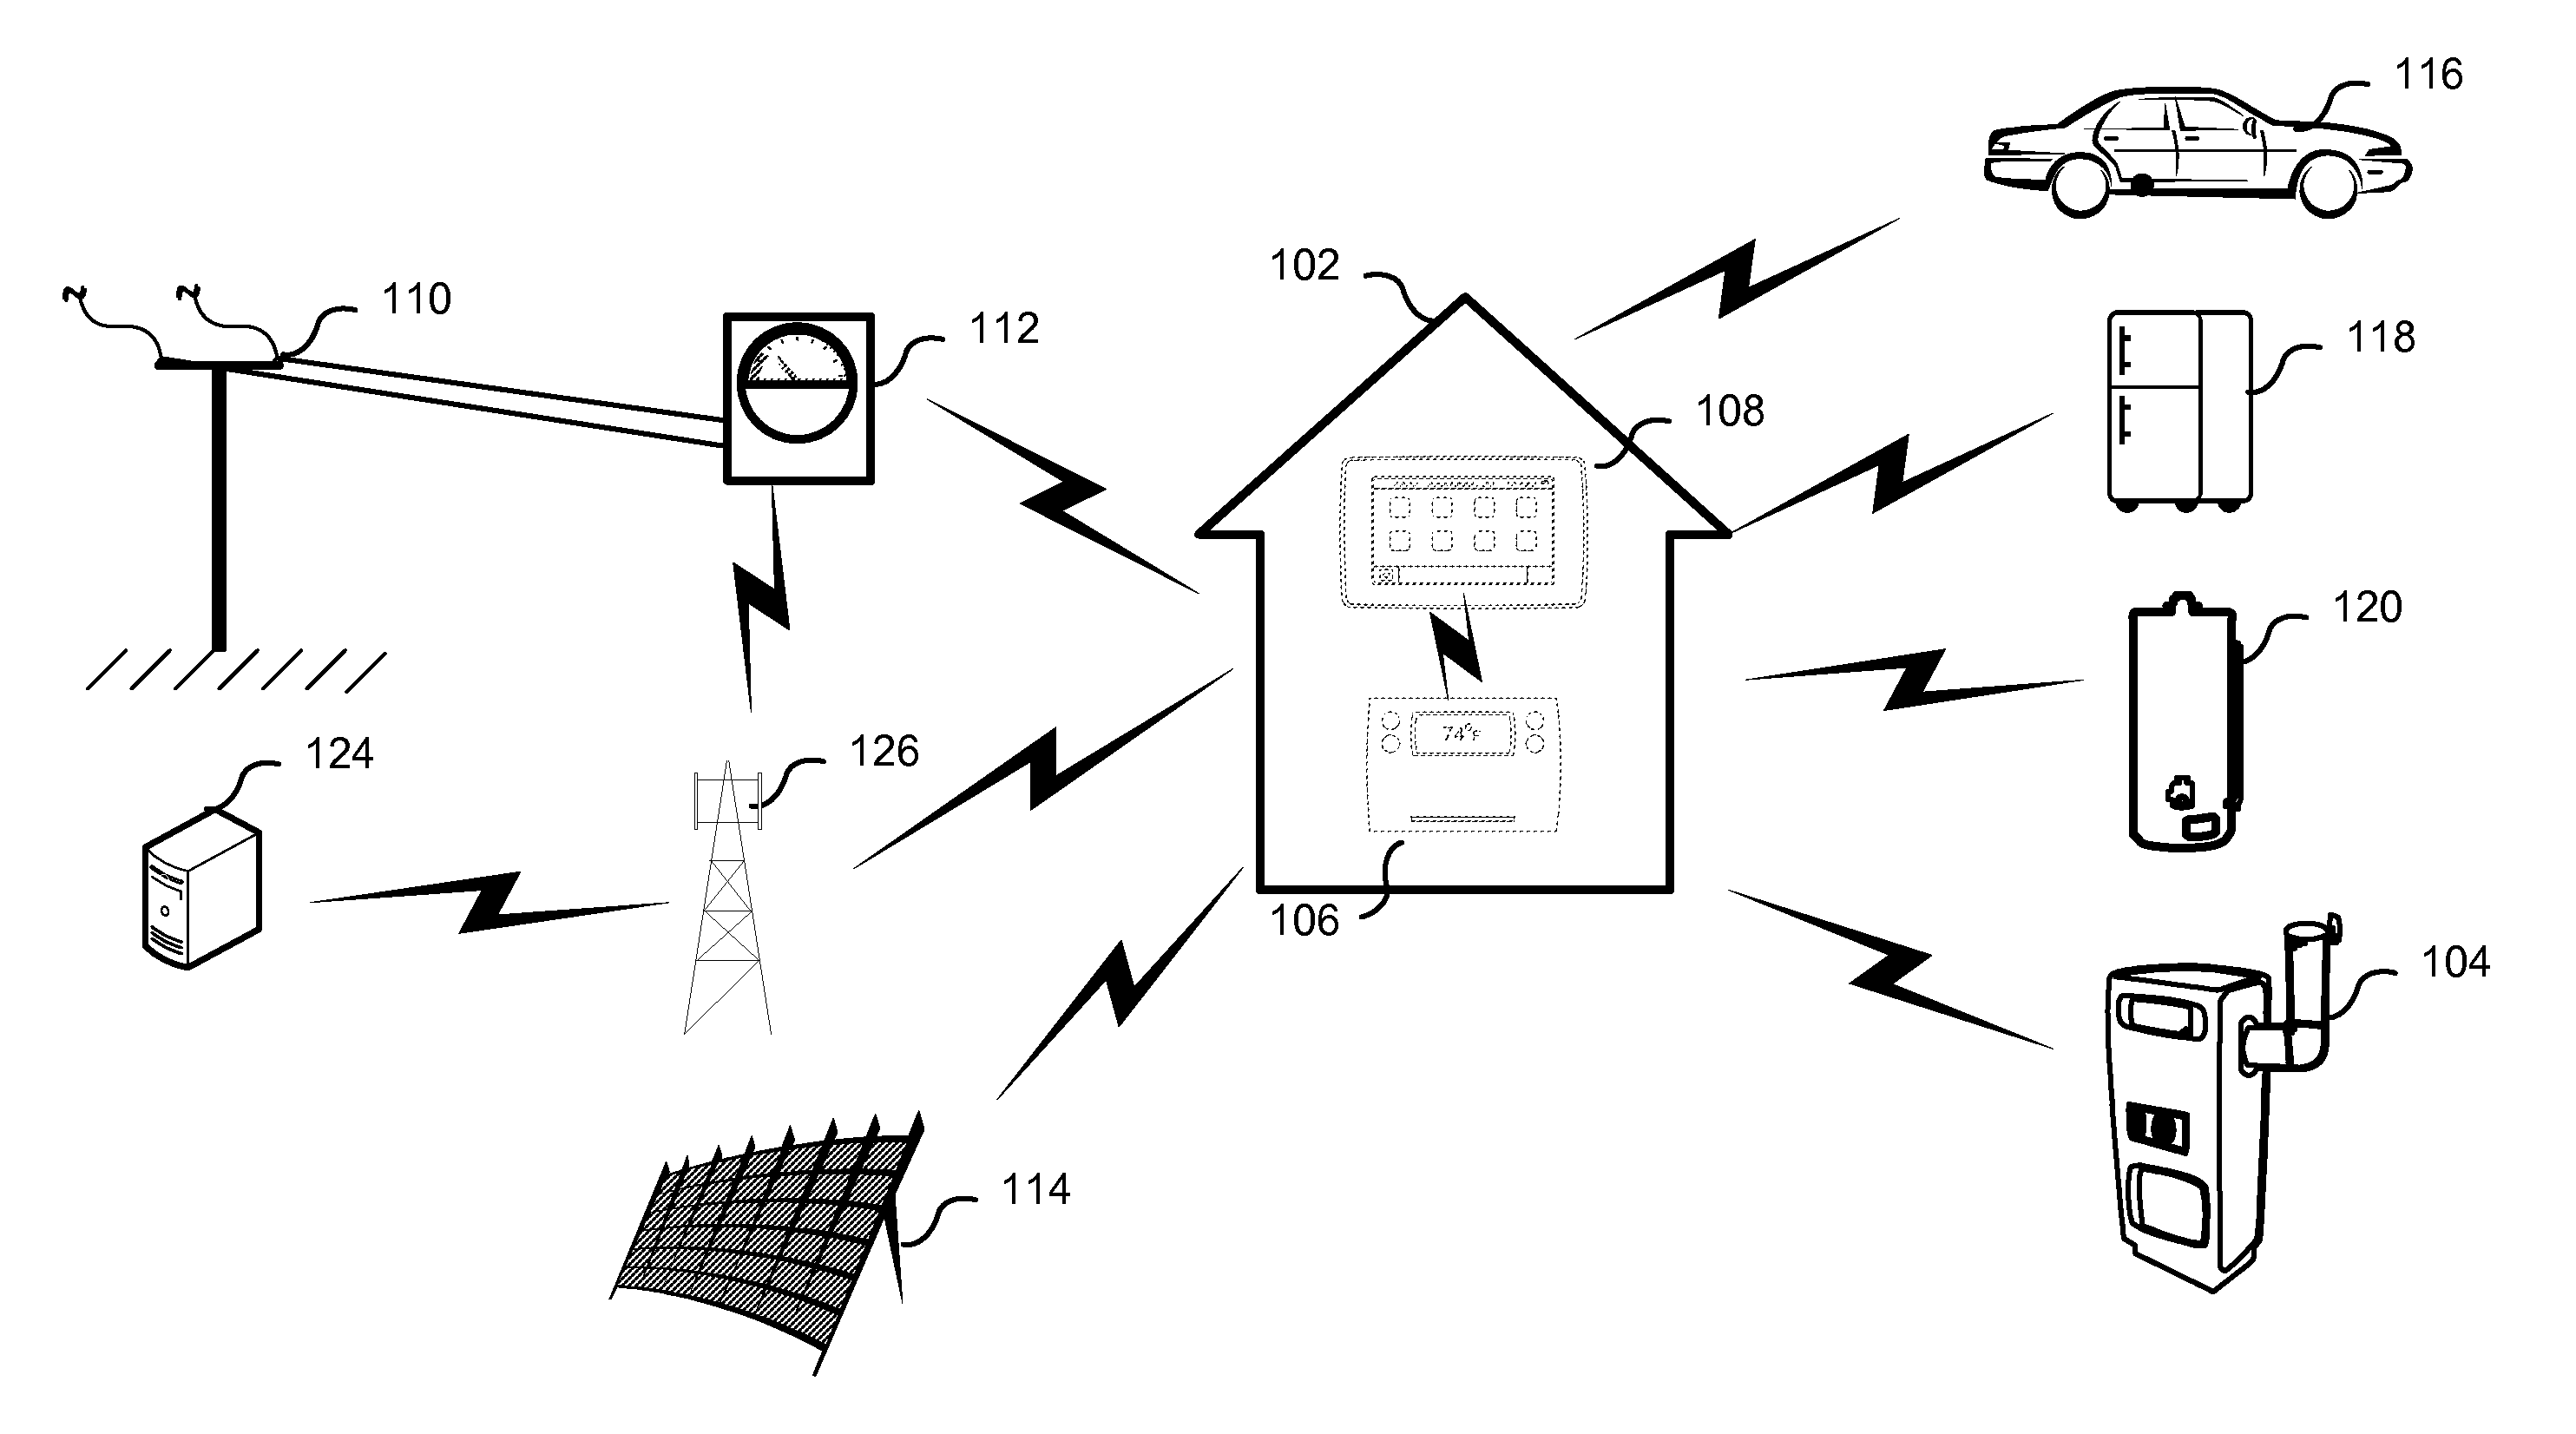 Portable information display dockable to a base thermostat